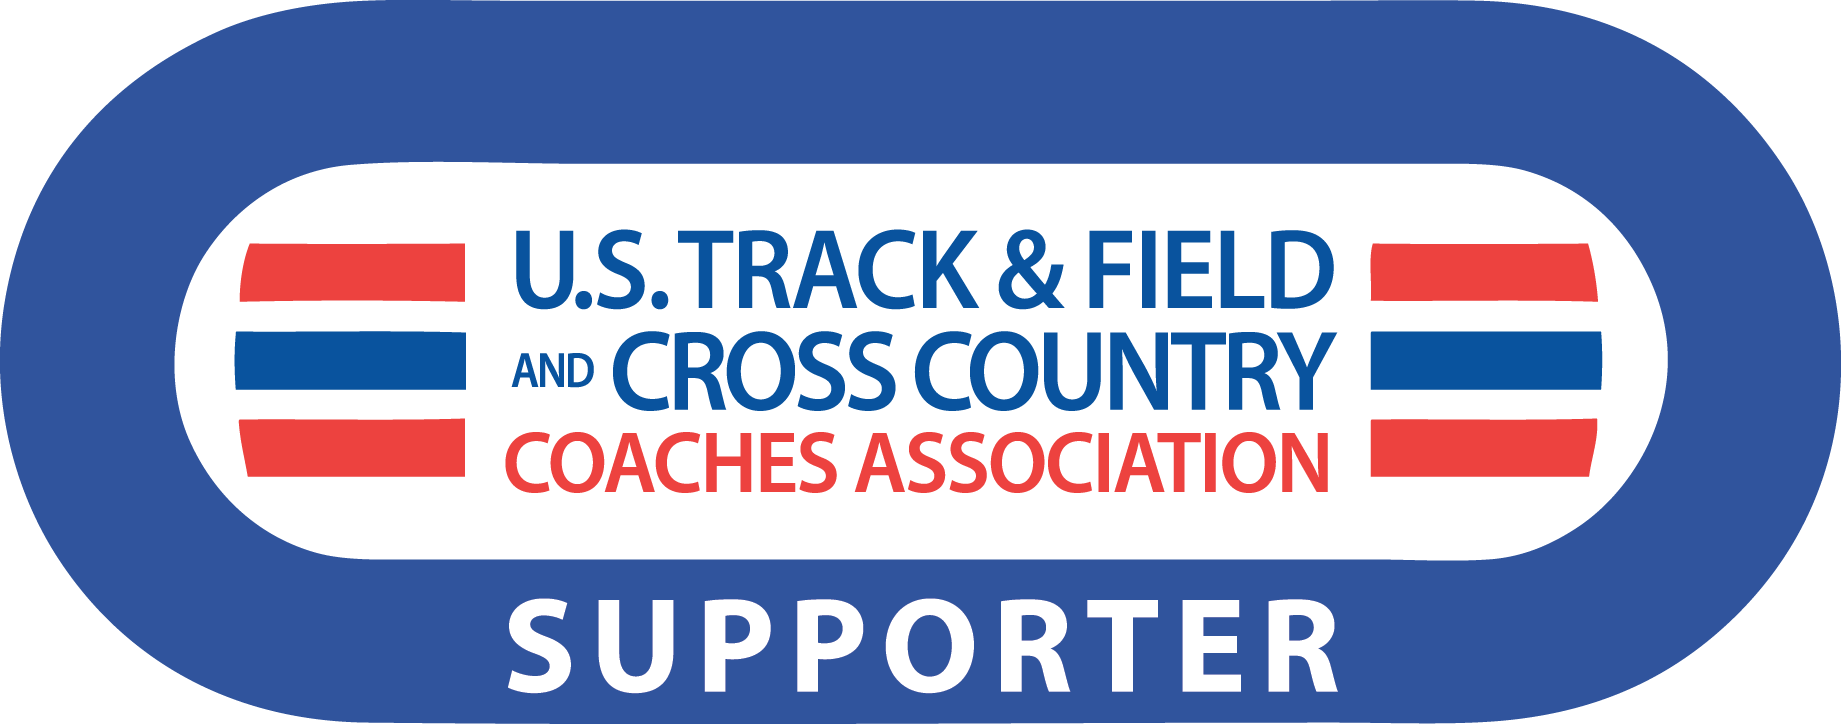 U.S track & field and cross country coaches association supporter